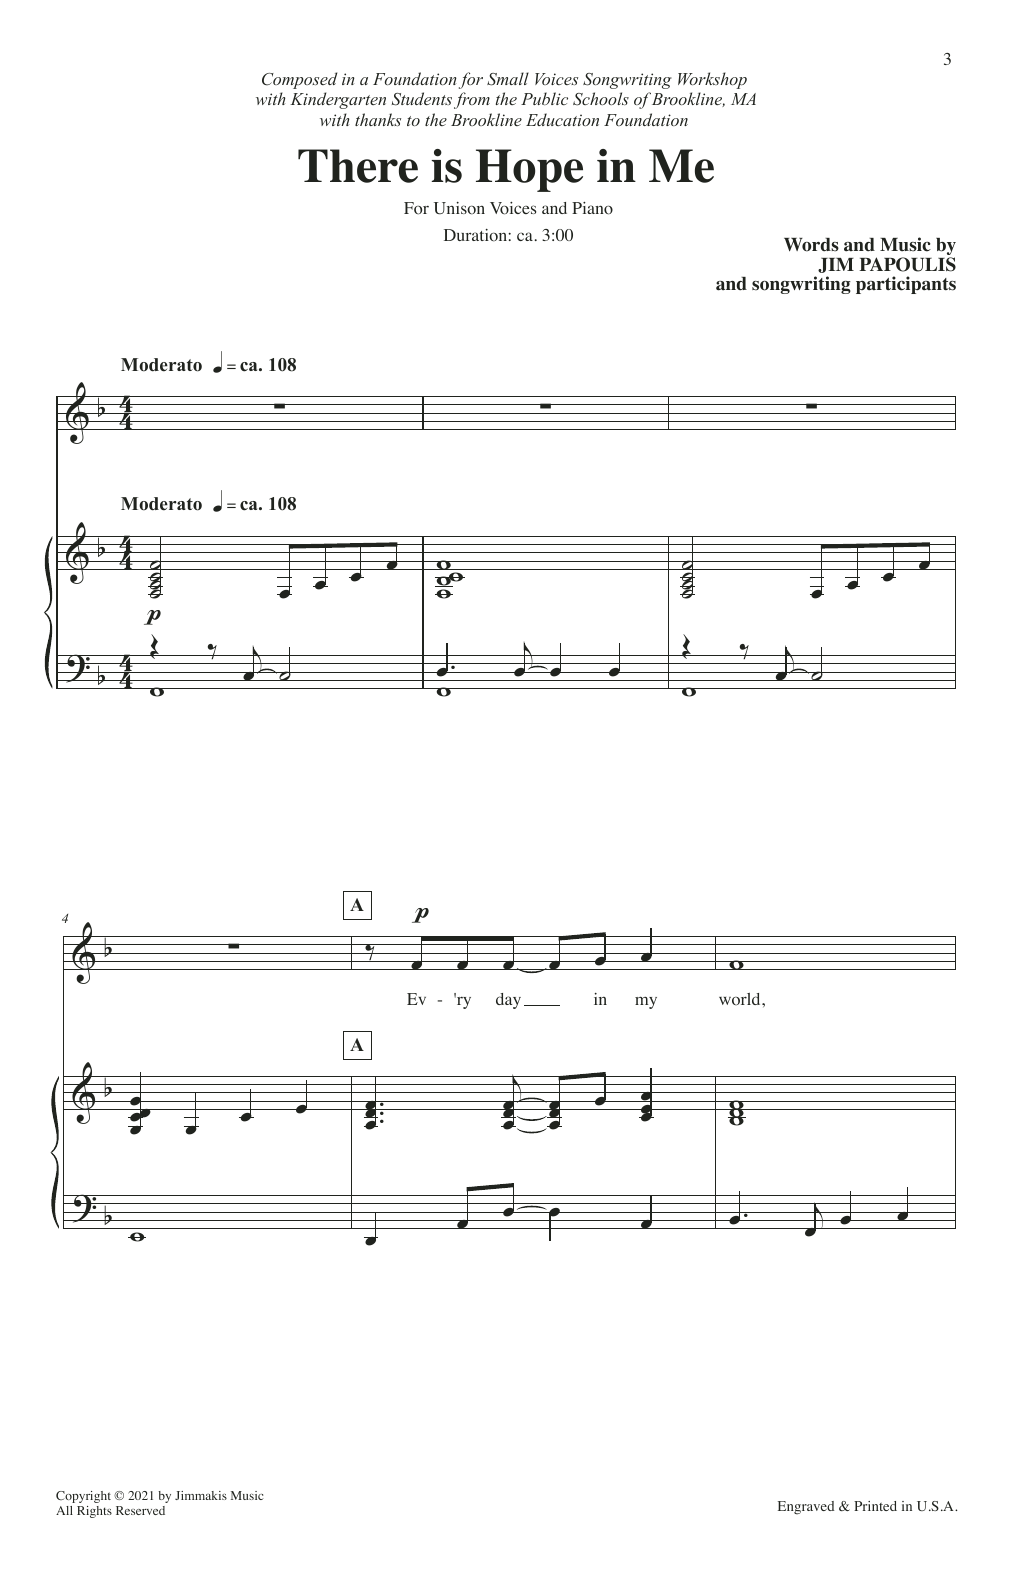 Download Jim Papoulis There Is Hope In Me Sheet Music